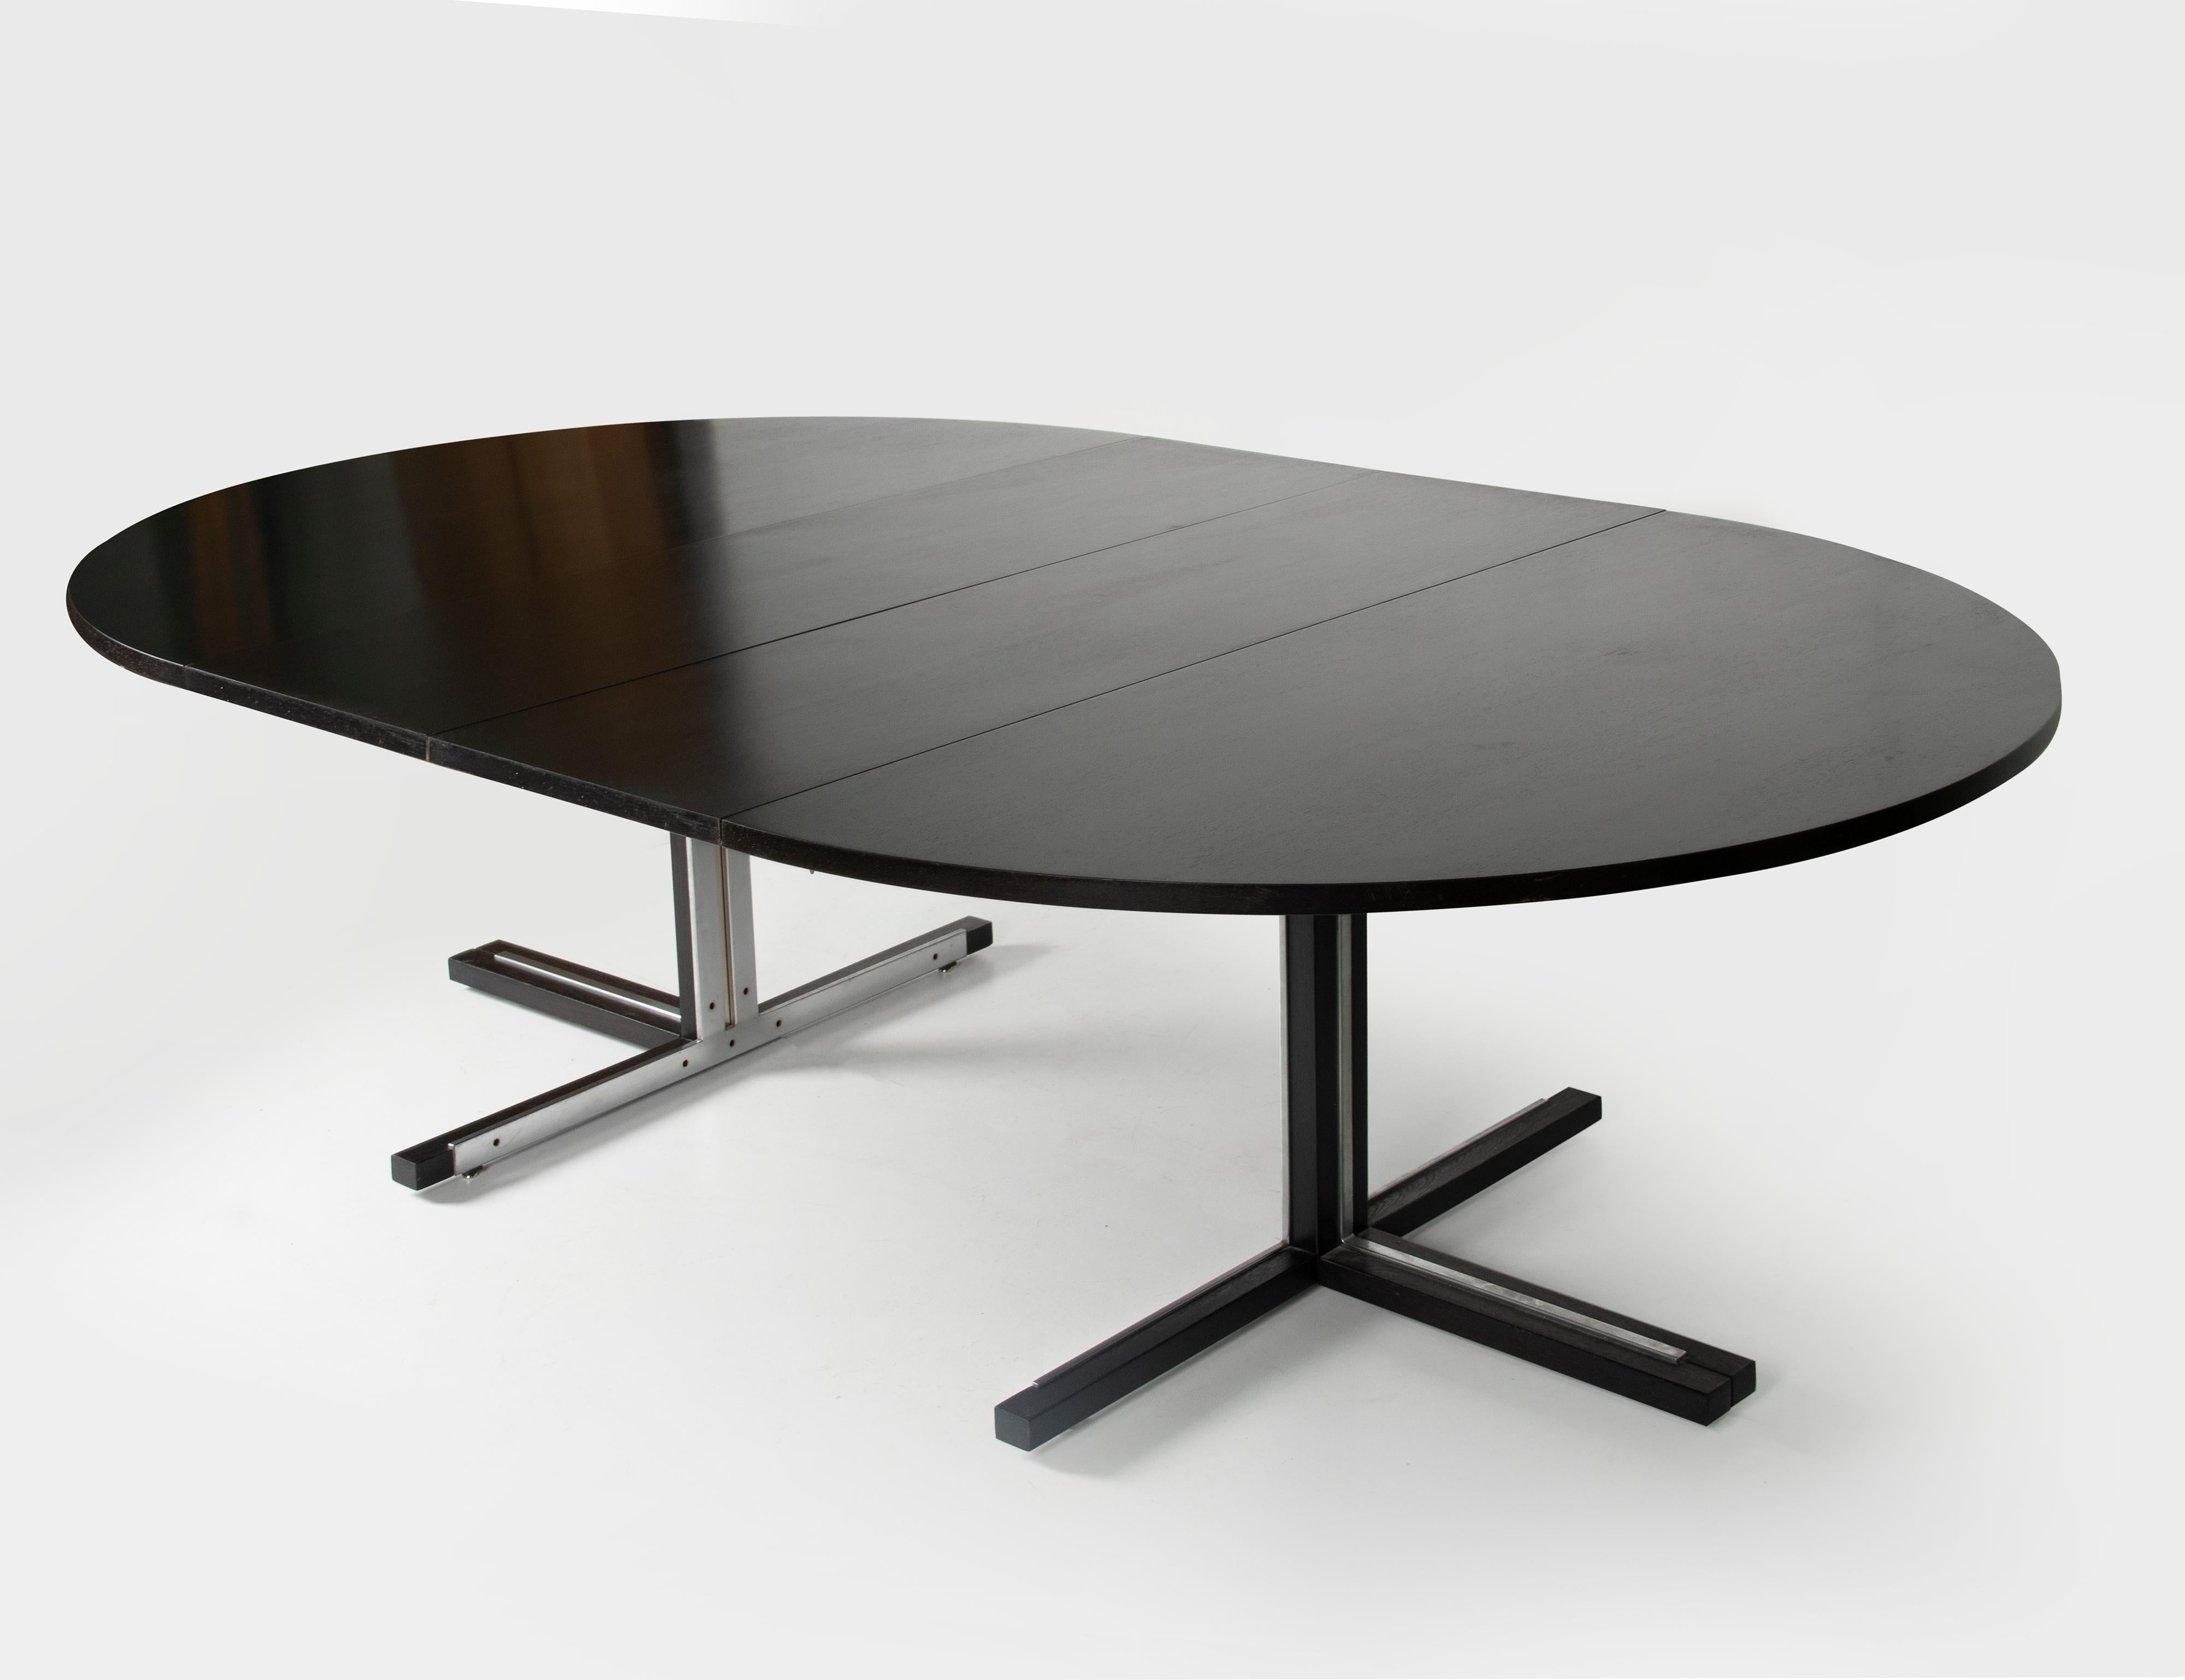 Wenge Mid-20th Century Modern Round Dining Table, extendable with 8 Matching Chairs